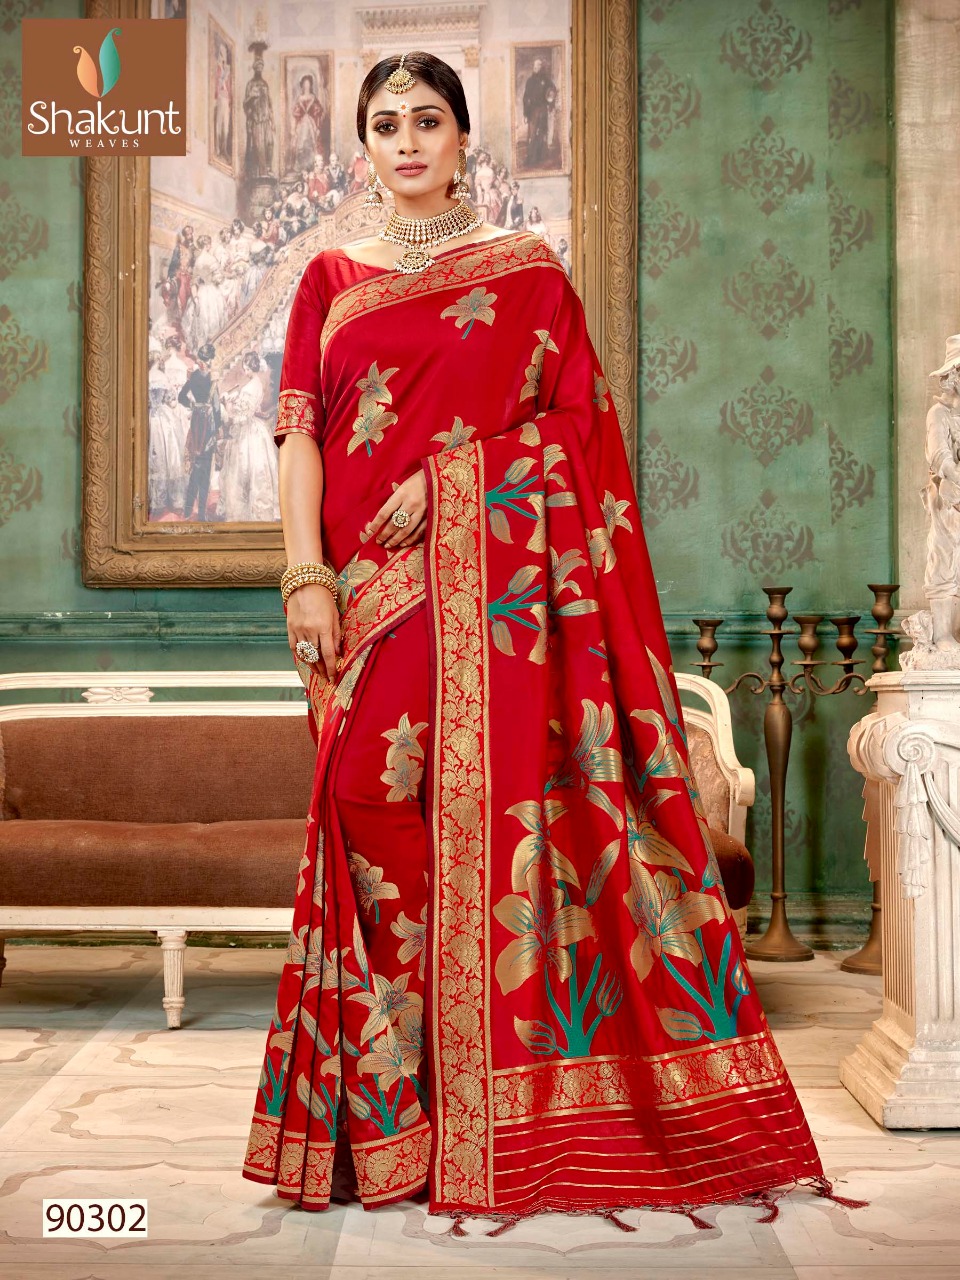 shakunt weaves bhanumati colorful fancy collection of sarees